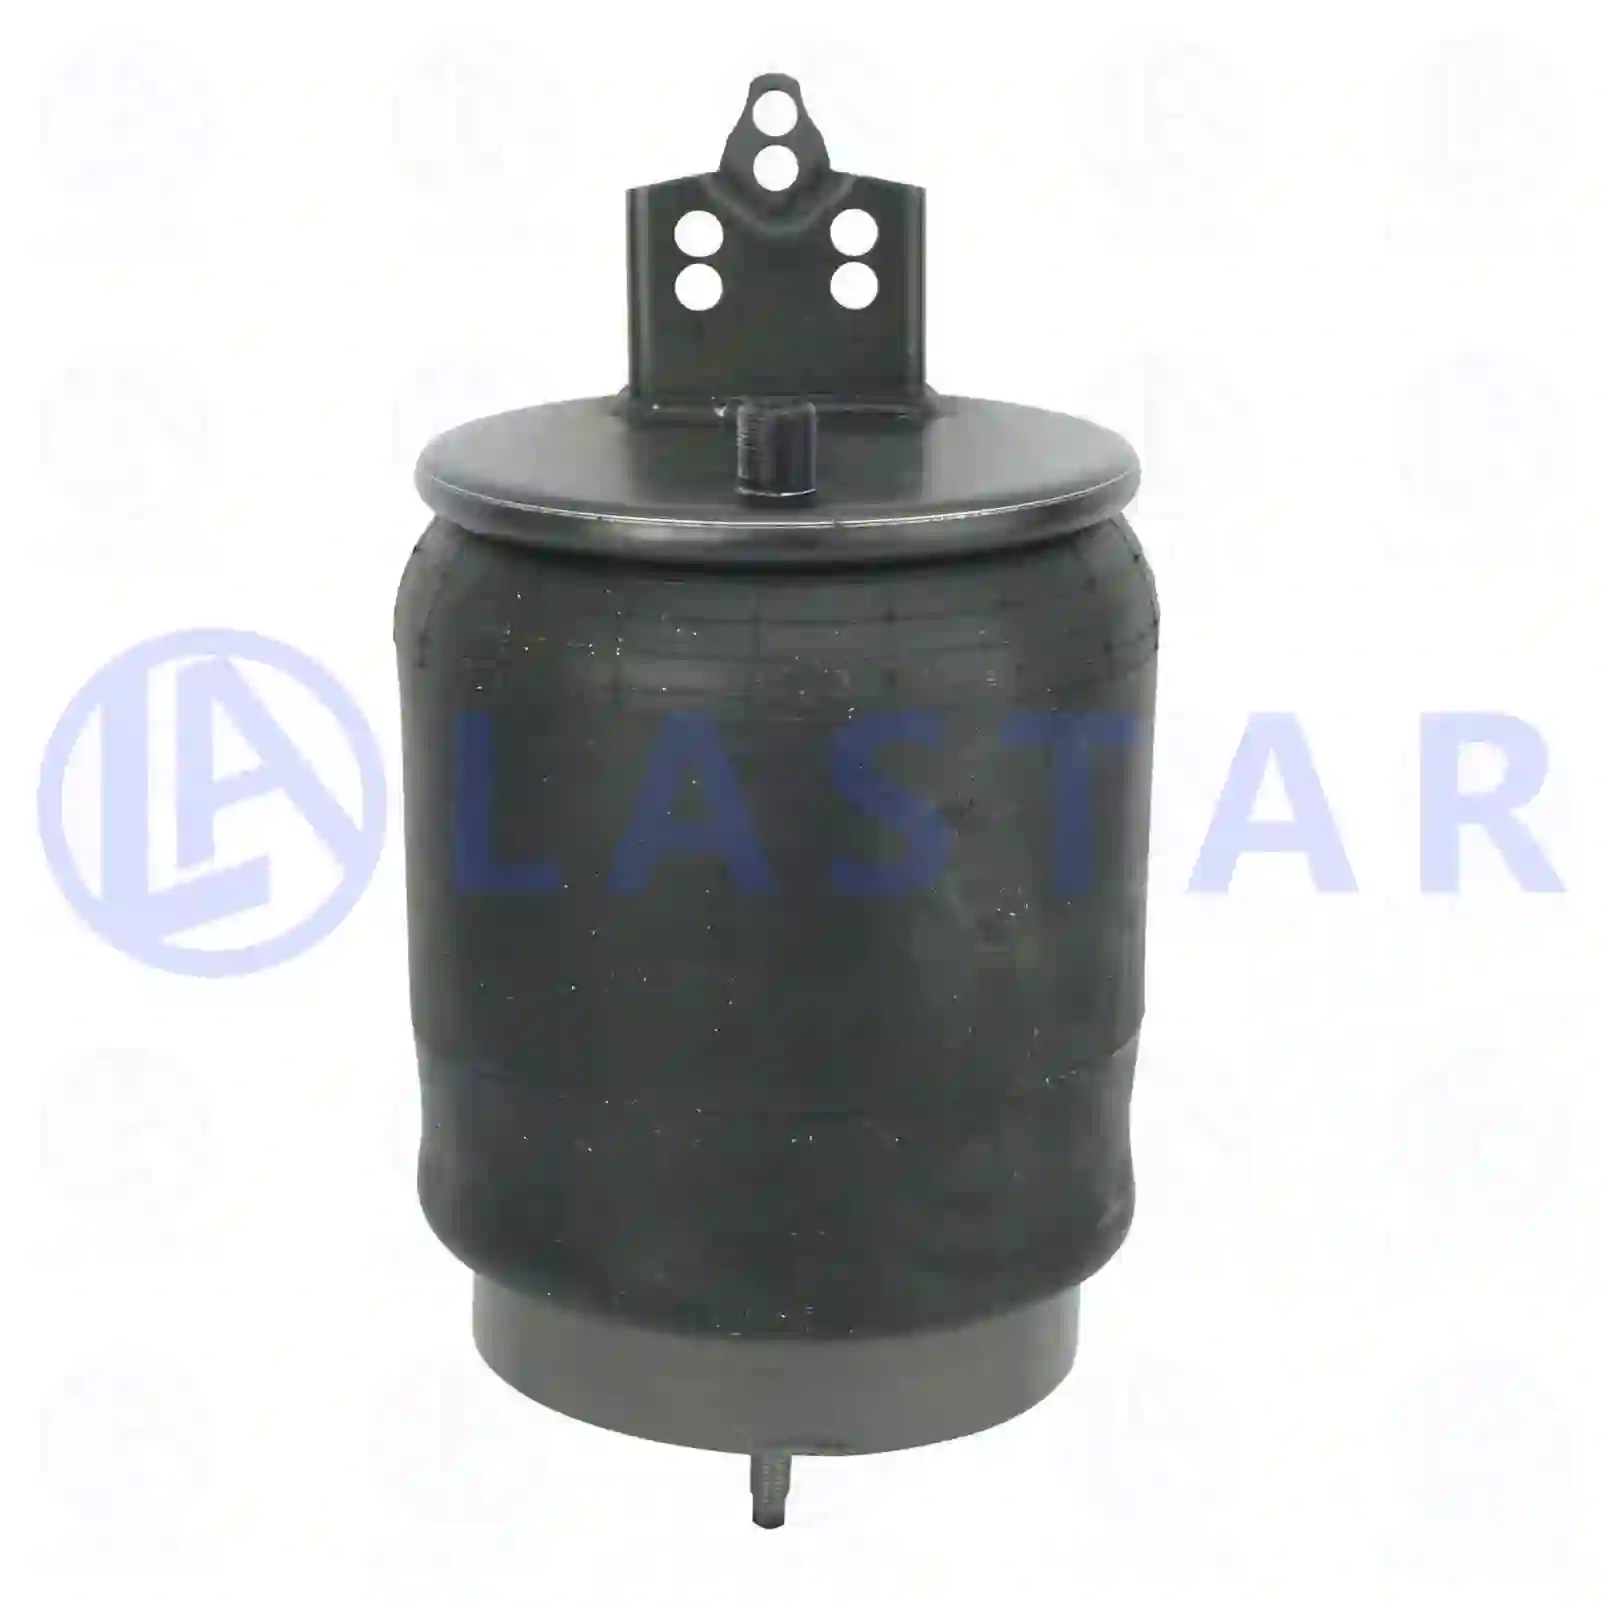 Air spring, with steel piston, 77728689, 1075890, 1076415, 20375226, 20427800, 20456150, 20531984, 20582206, 21961374, 3171692, ZG40757-0008 ||  77728689 Lastar Spare Part | Truck Spare Parts, Auotomotive Spare Parts Air spring, with steel piston, 77728689, 1075890, 1076415, 20375226, 20427800, 20456150, 20531984, 20582206, 21961374, 3171692, ZG40757-0008 ||  77728689 Lastar Spare Part | Truck Spare Parts, Auotomotive Spare Parts